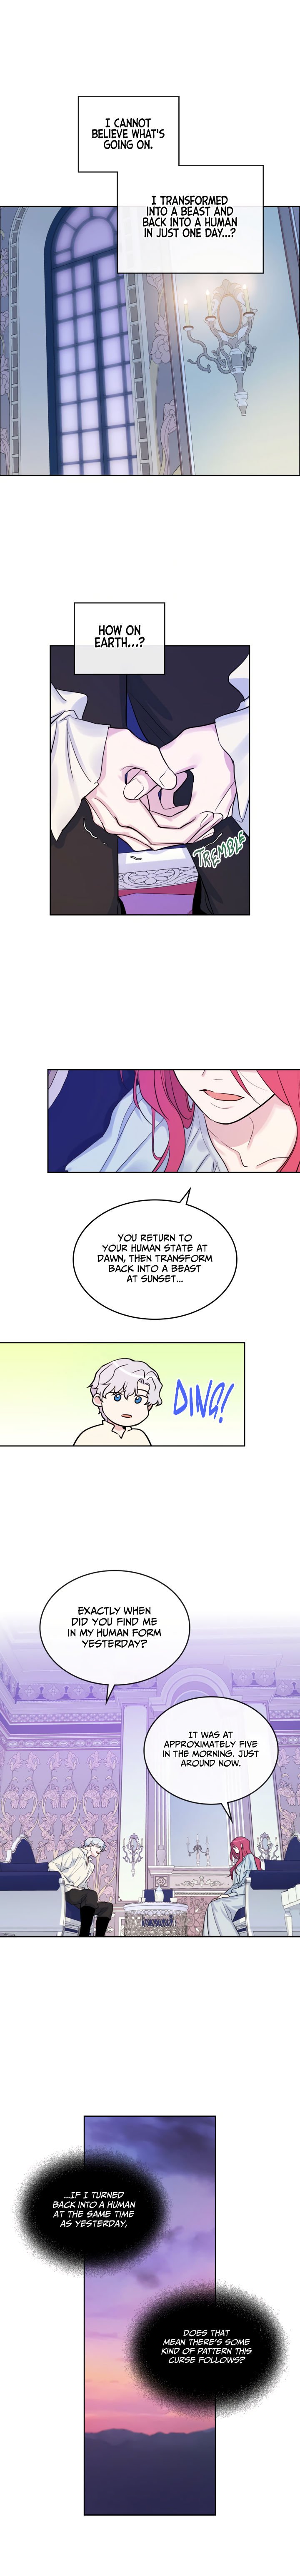 the-lady-and-the-beast-chap-35-1